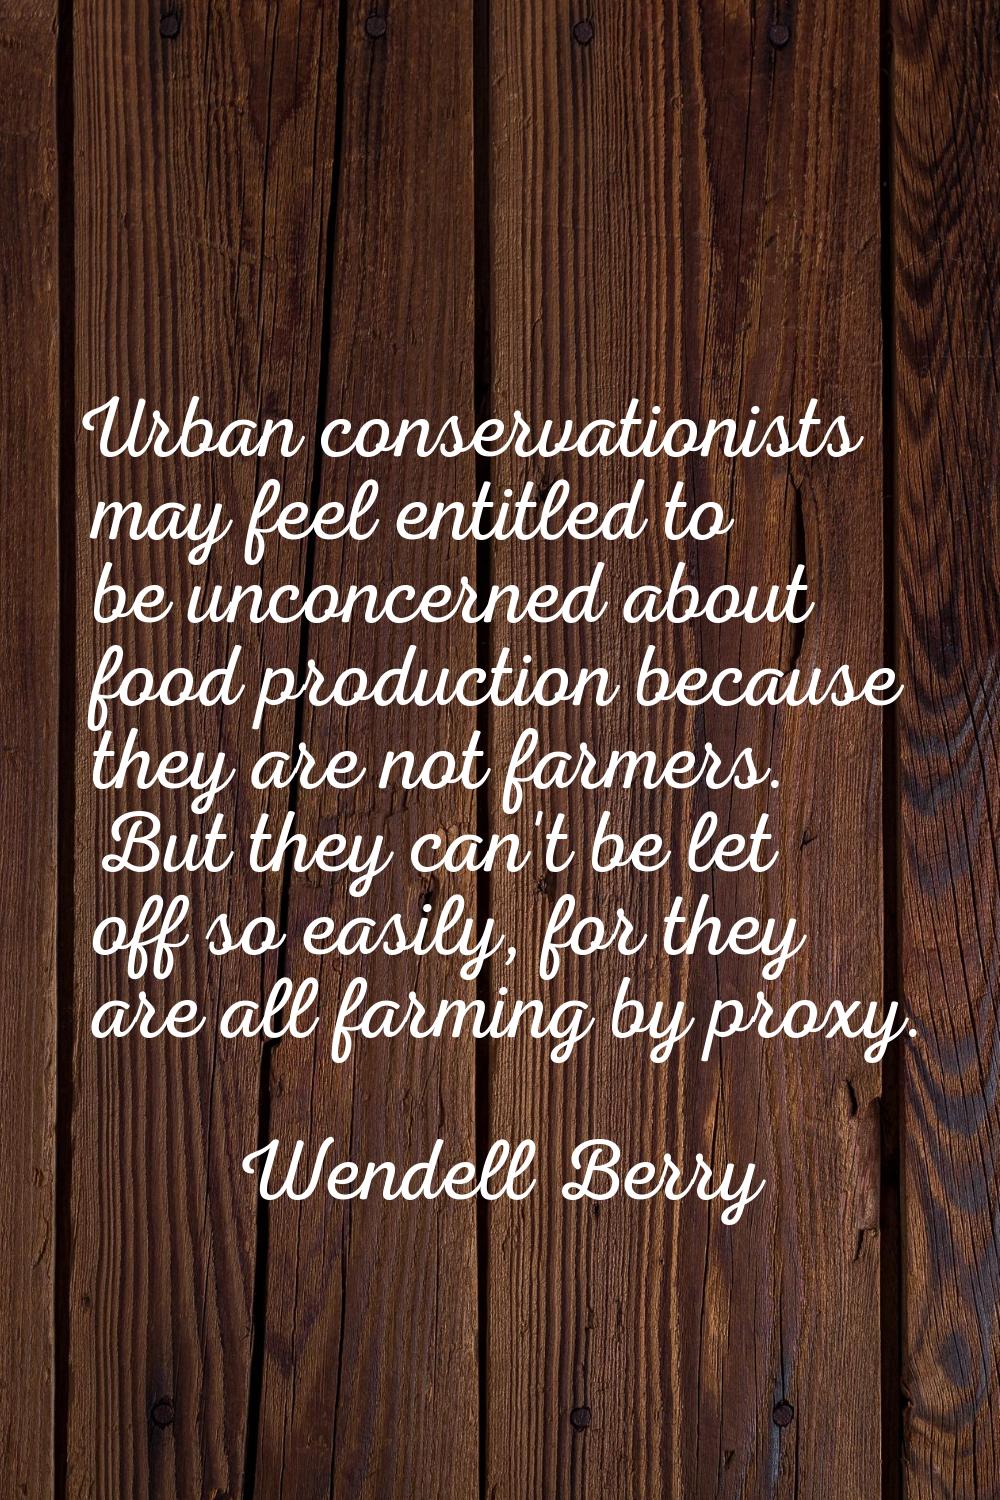 Urban conservationists may feel entitled to be unconcerned about food production because they are n